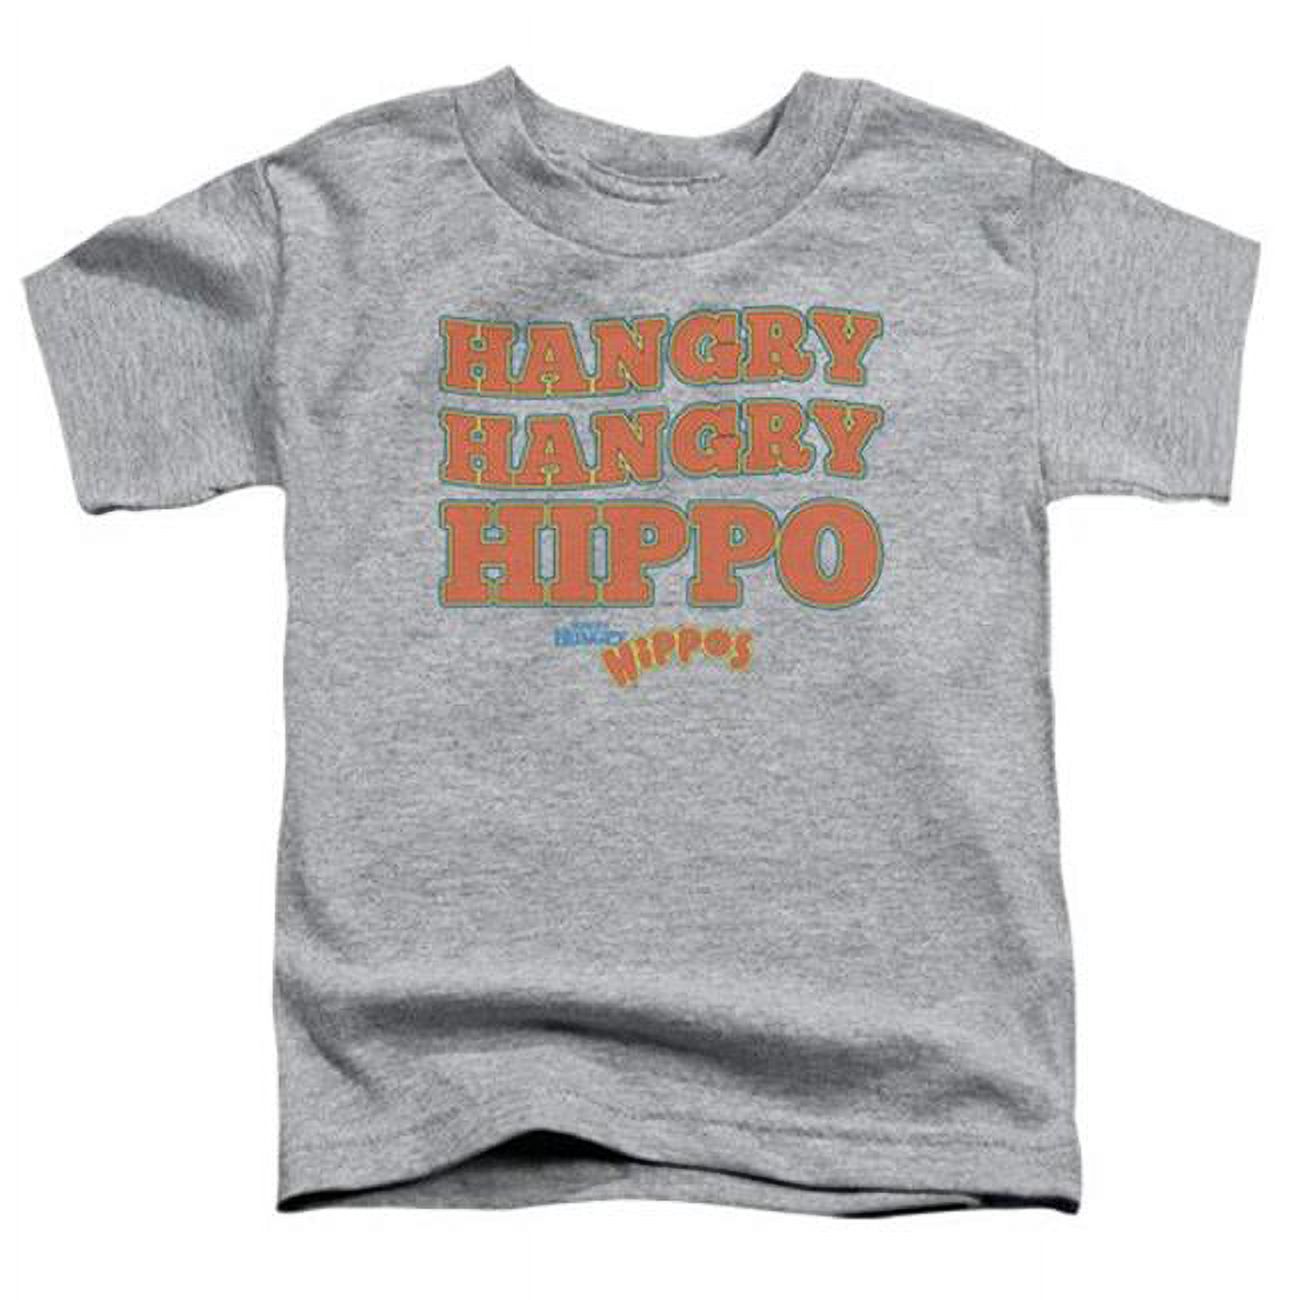 Trevco  HBRO320-TT-1 Stretch Armstrong Badge Toddler Short Sleeve T-Shirt - Athletic Heather, Small 2T - image 1 of 1